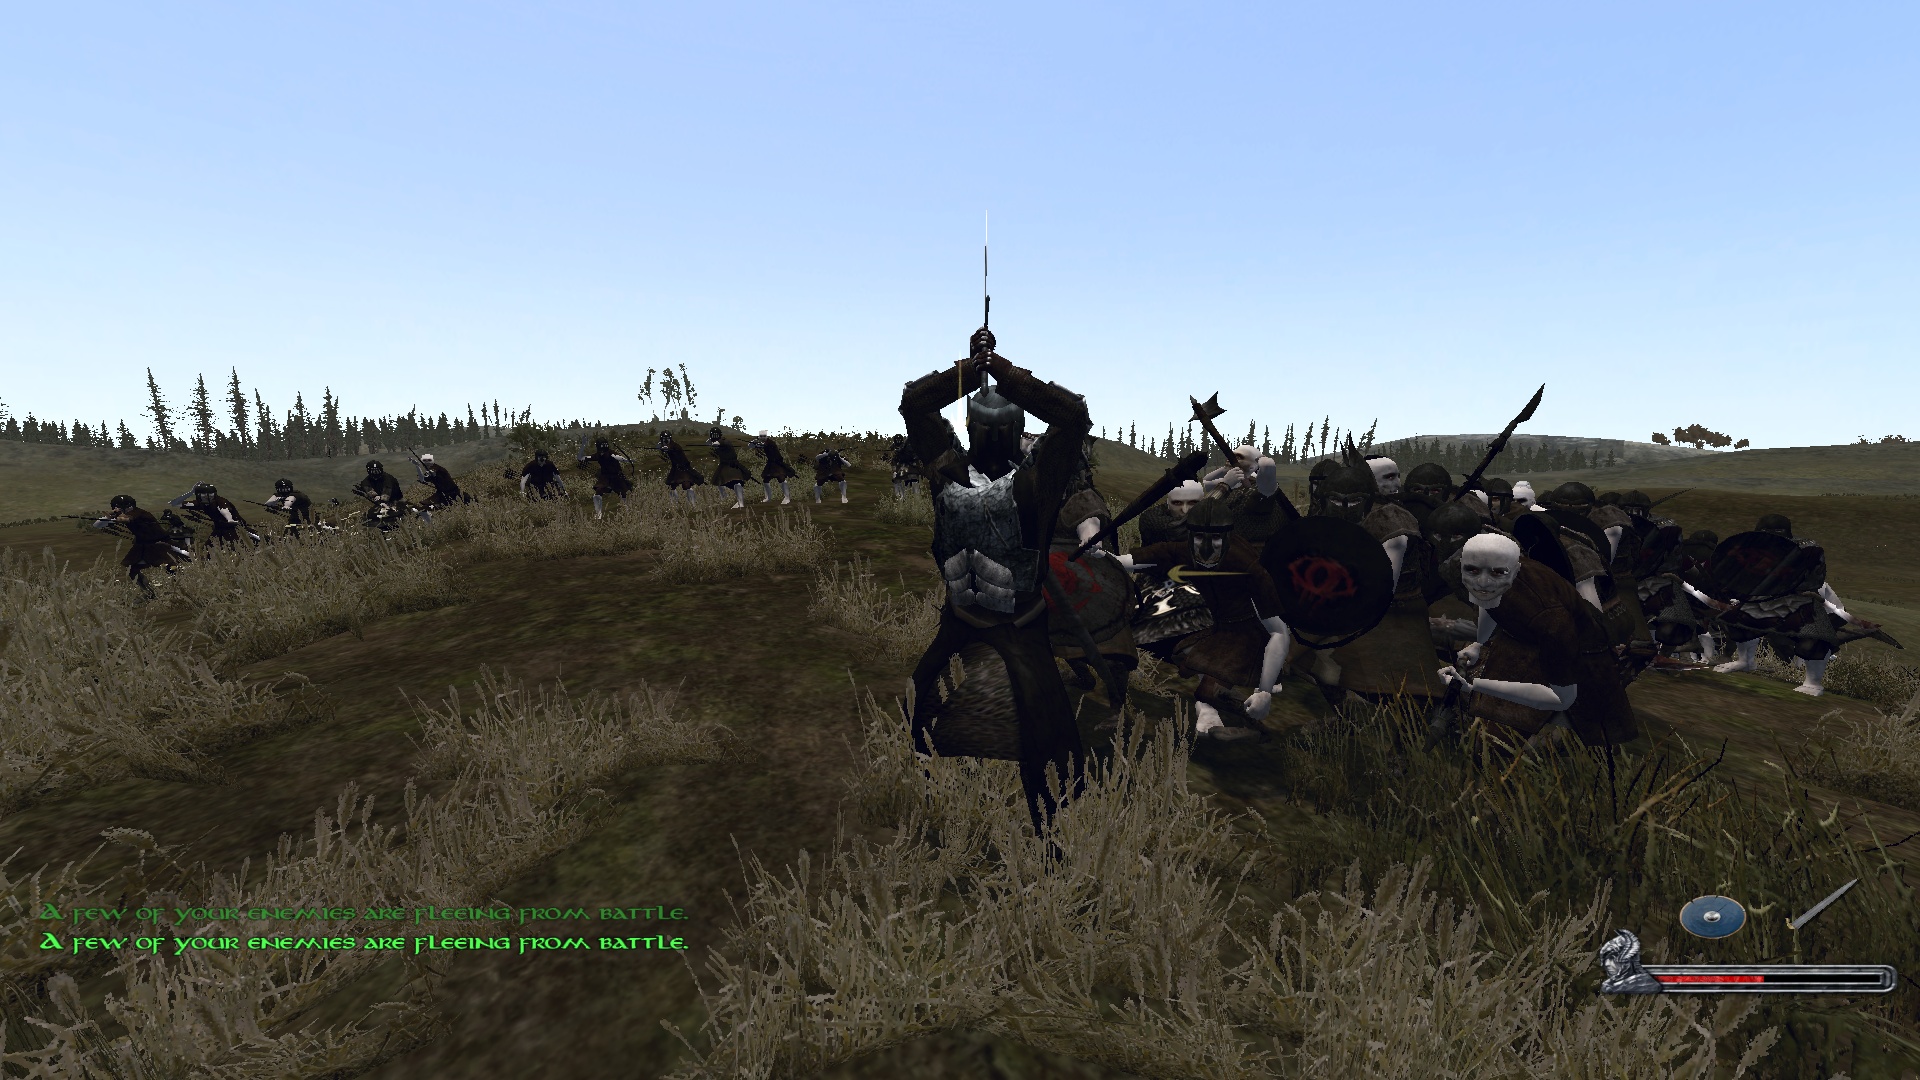 Last days warband. Варбанд the last Days. Mount and Blade Warband the last Days. Mount and Blade the last Days of the third age. Маунт энд блейд the last Days of the third age.